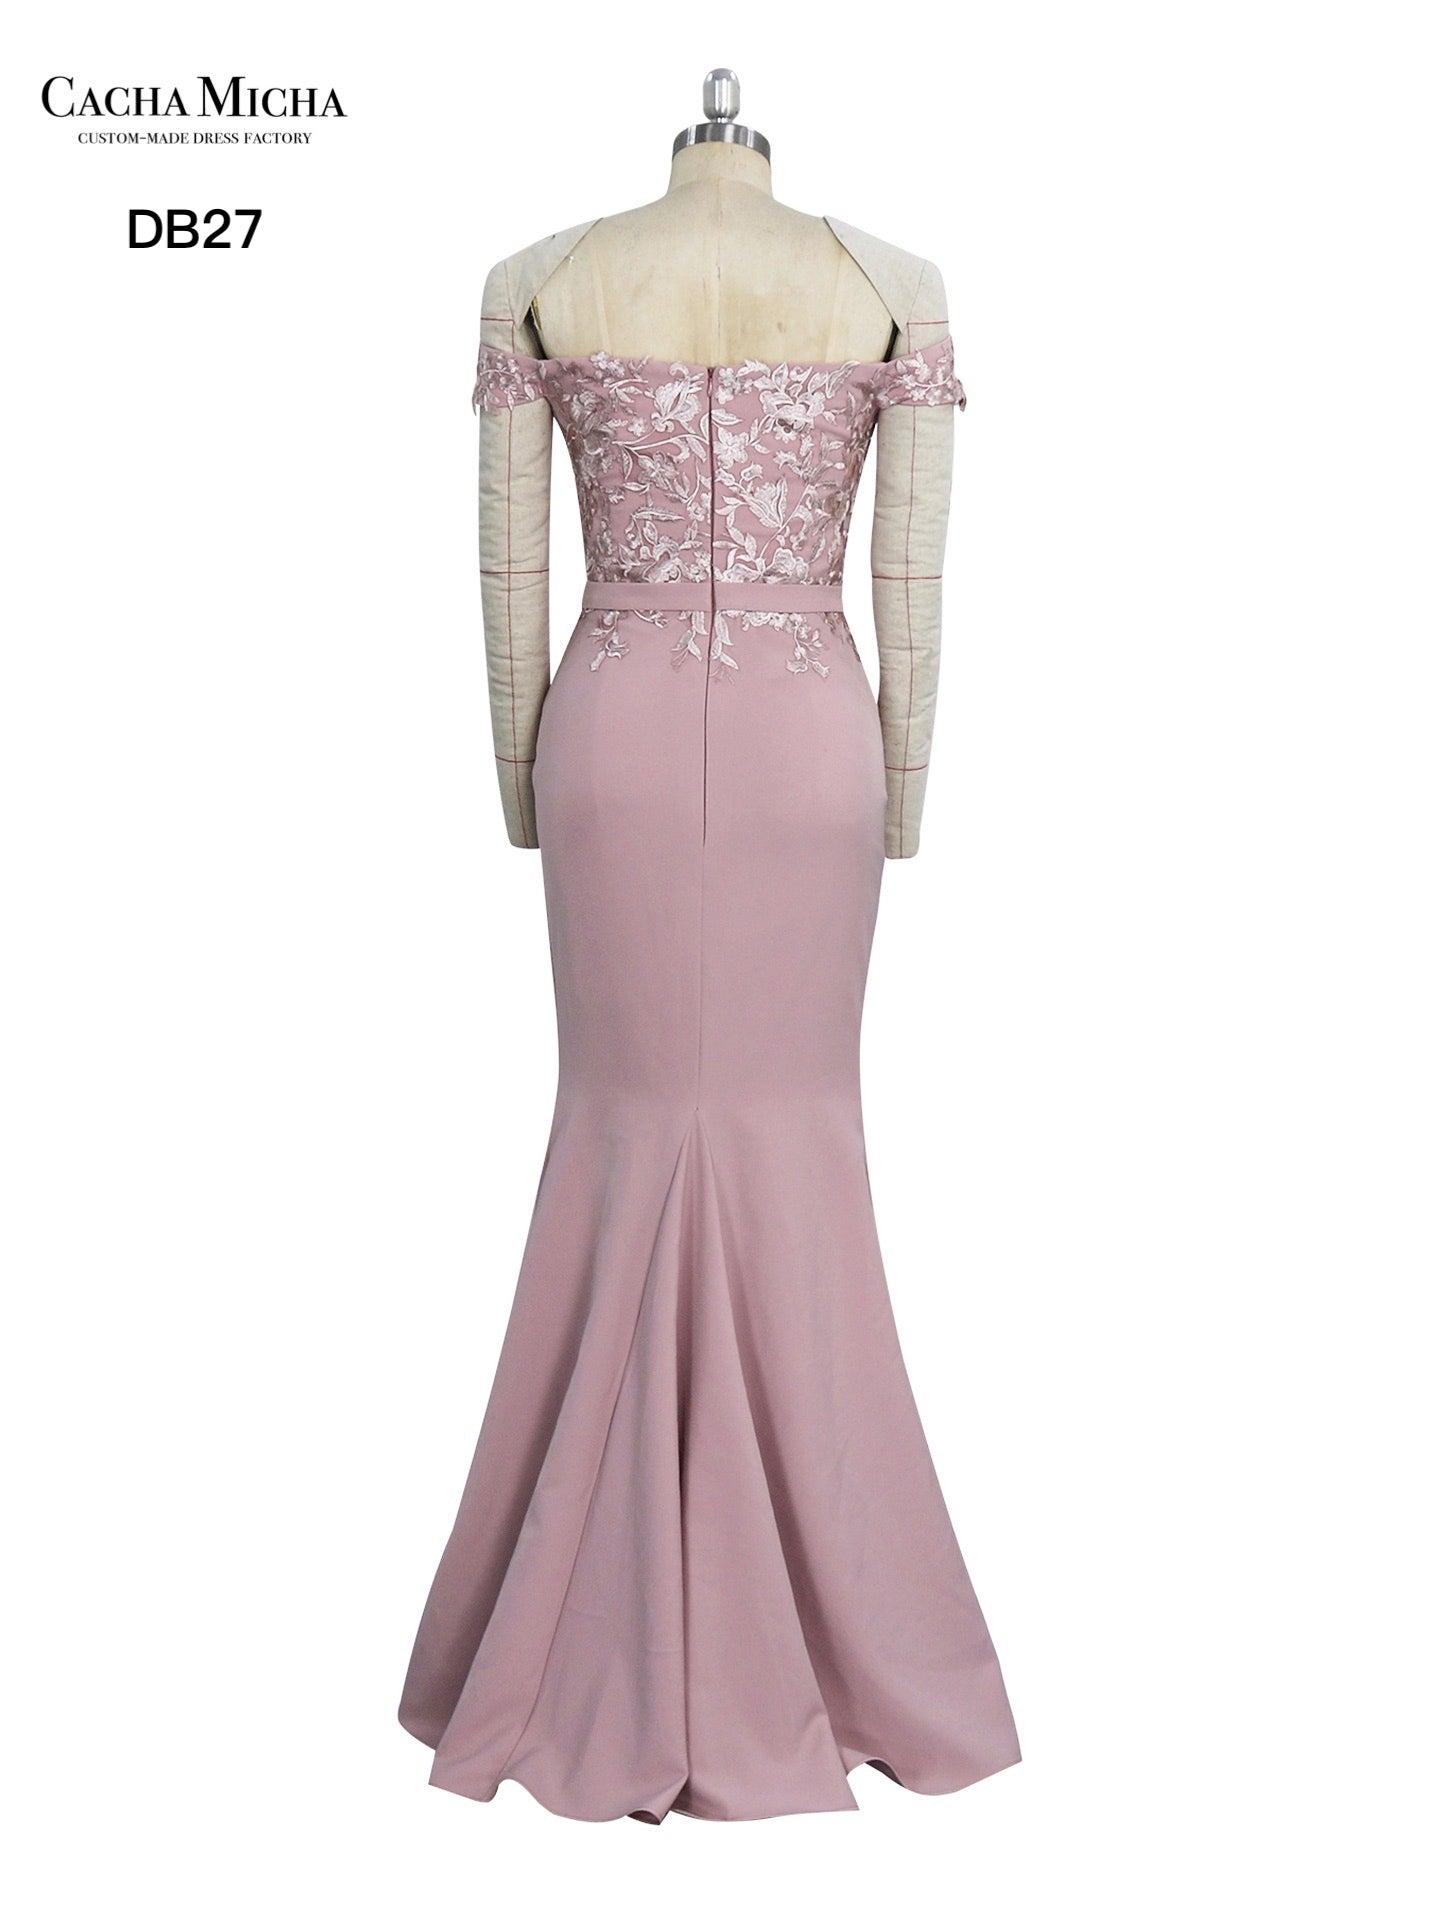 Off Shoulder Lace Top Dusty Pink Crepe Bridesmaid Dress DB27